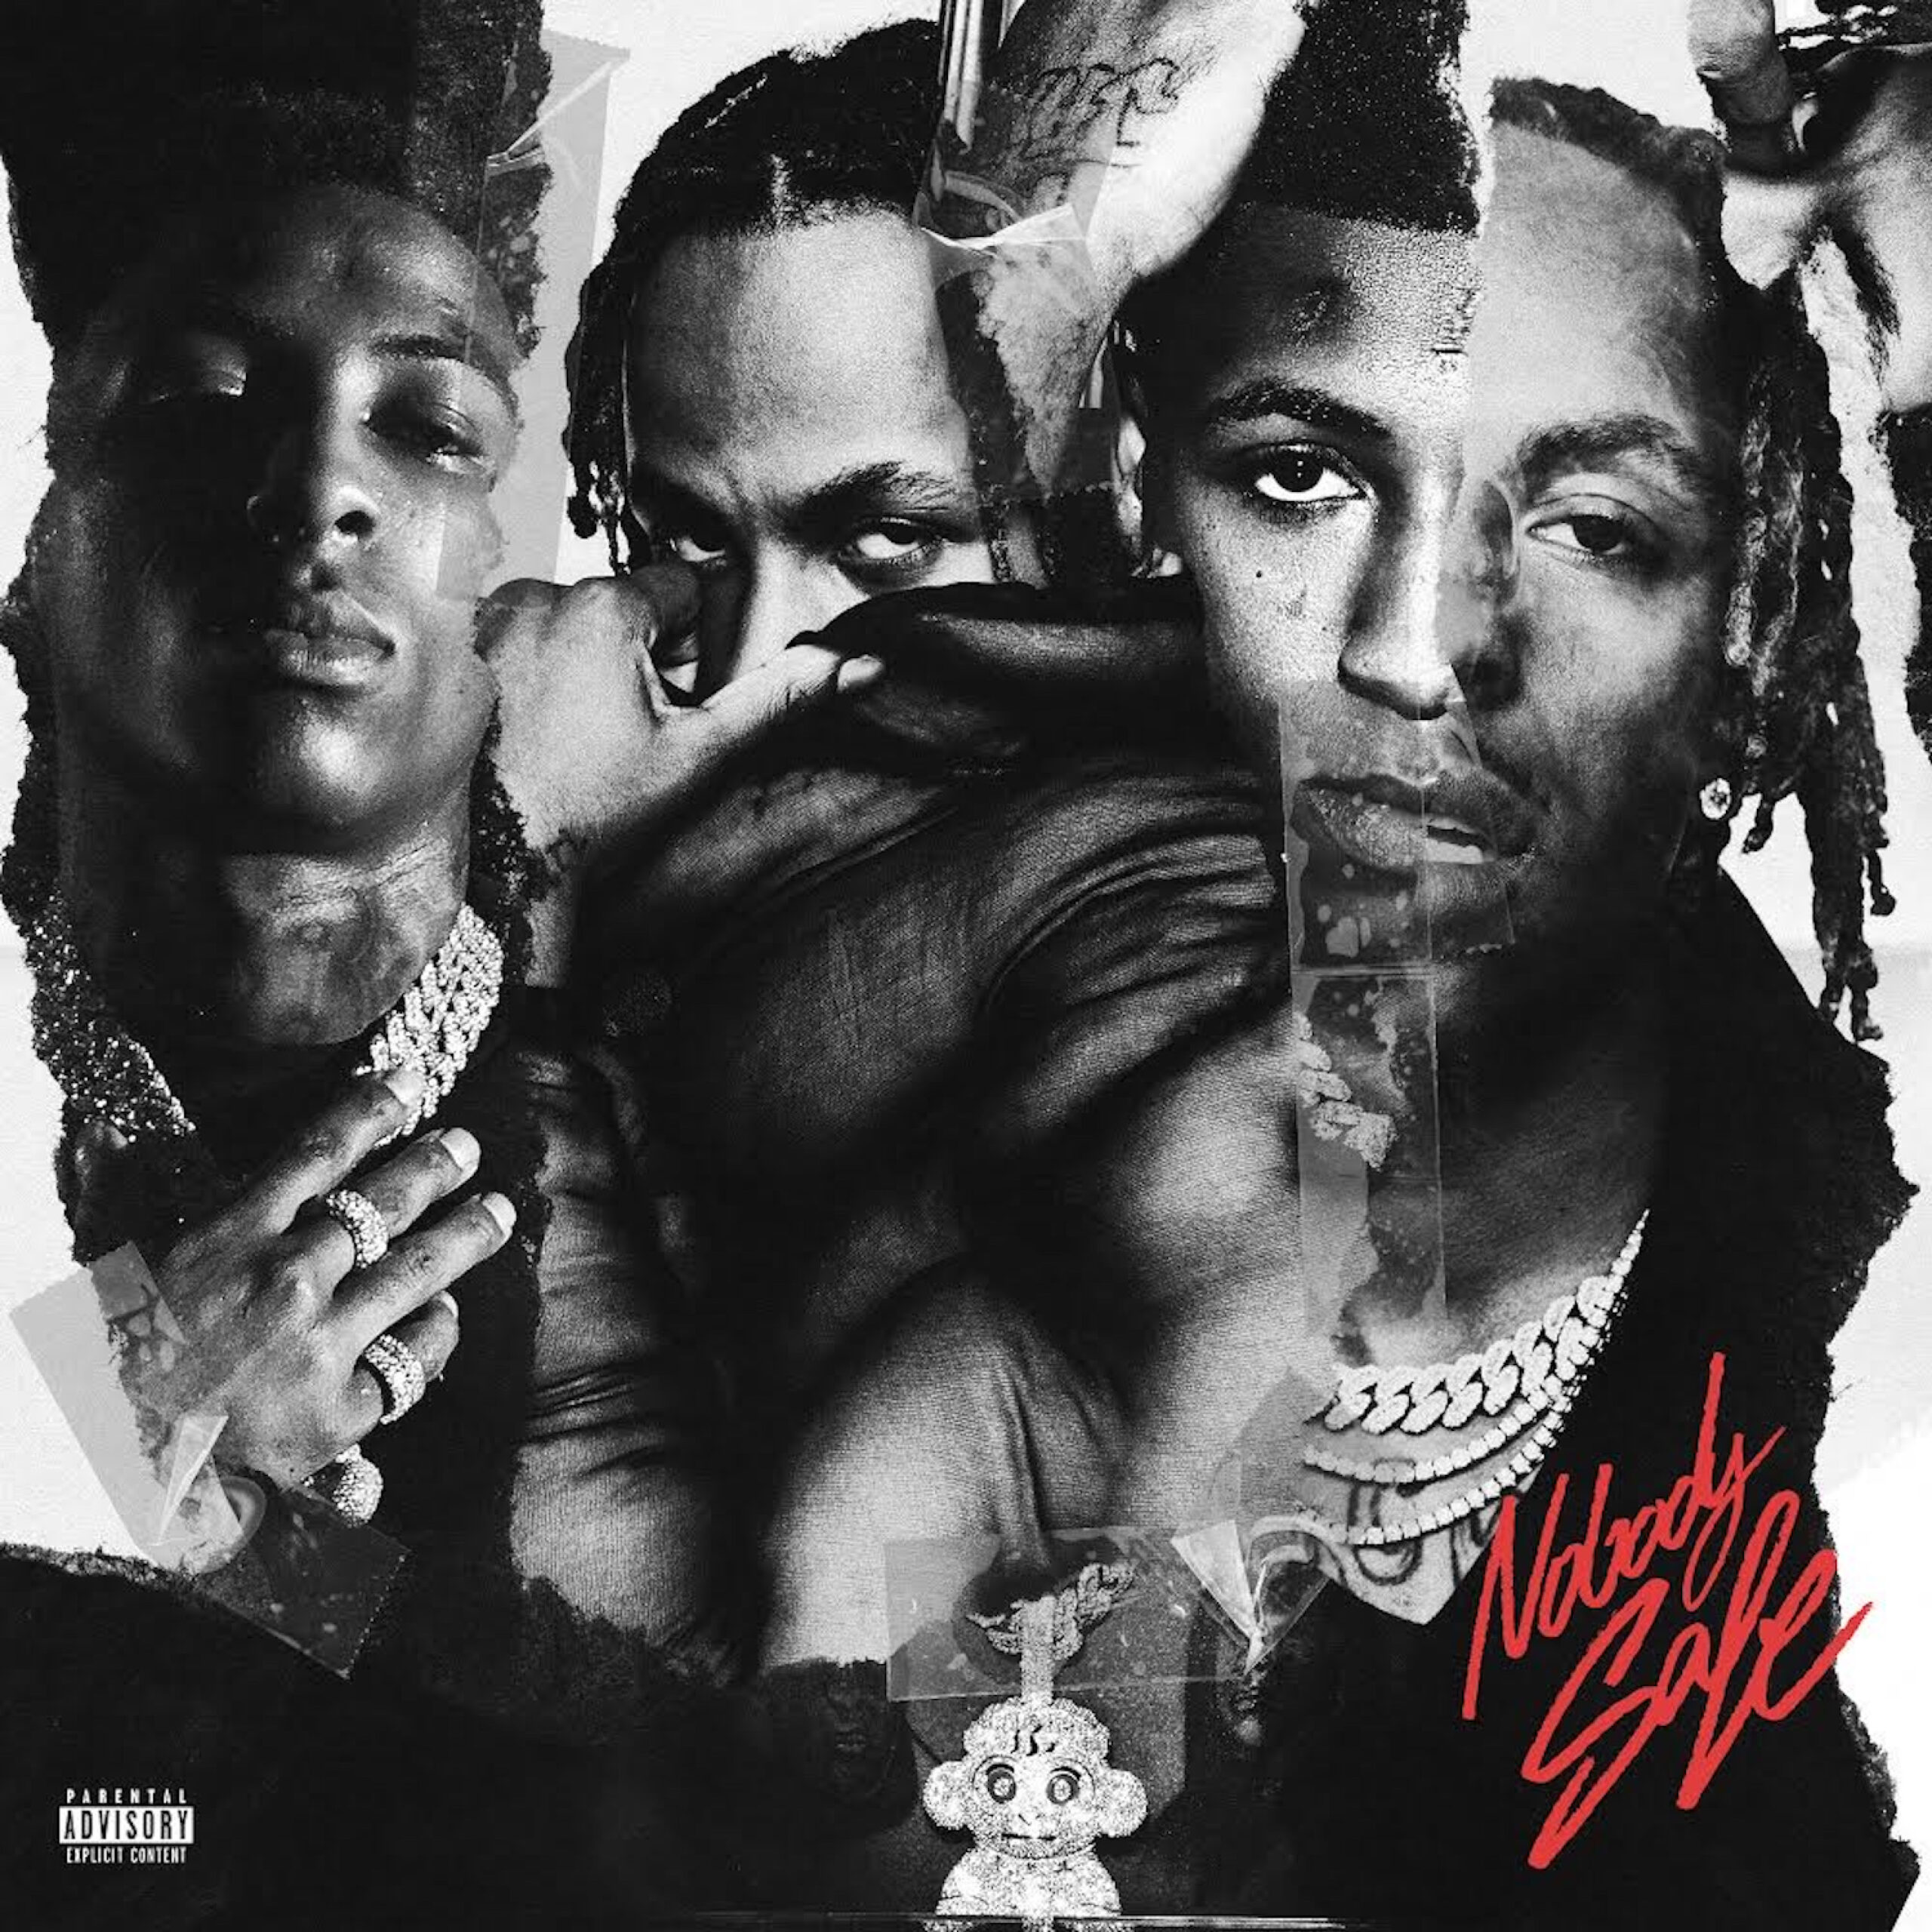 Stream Rich The Kid and Youngboy NBA “Nobody Safe” Album